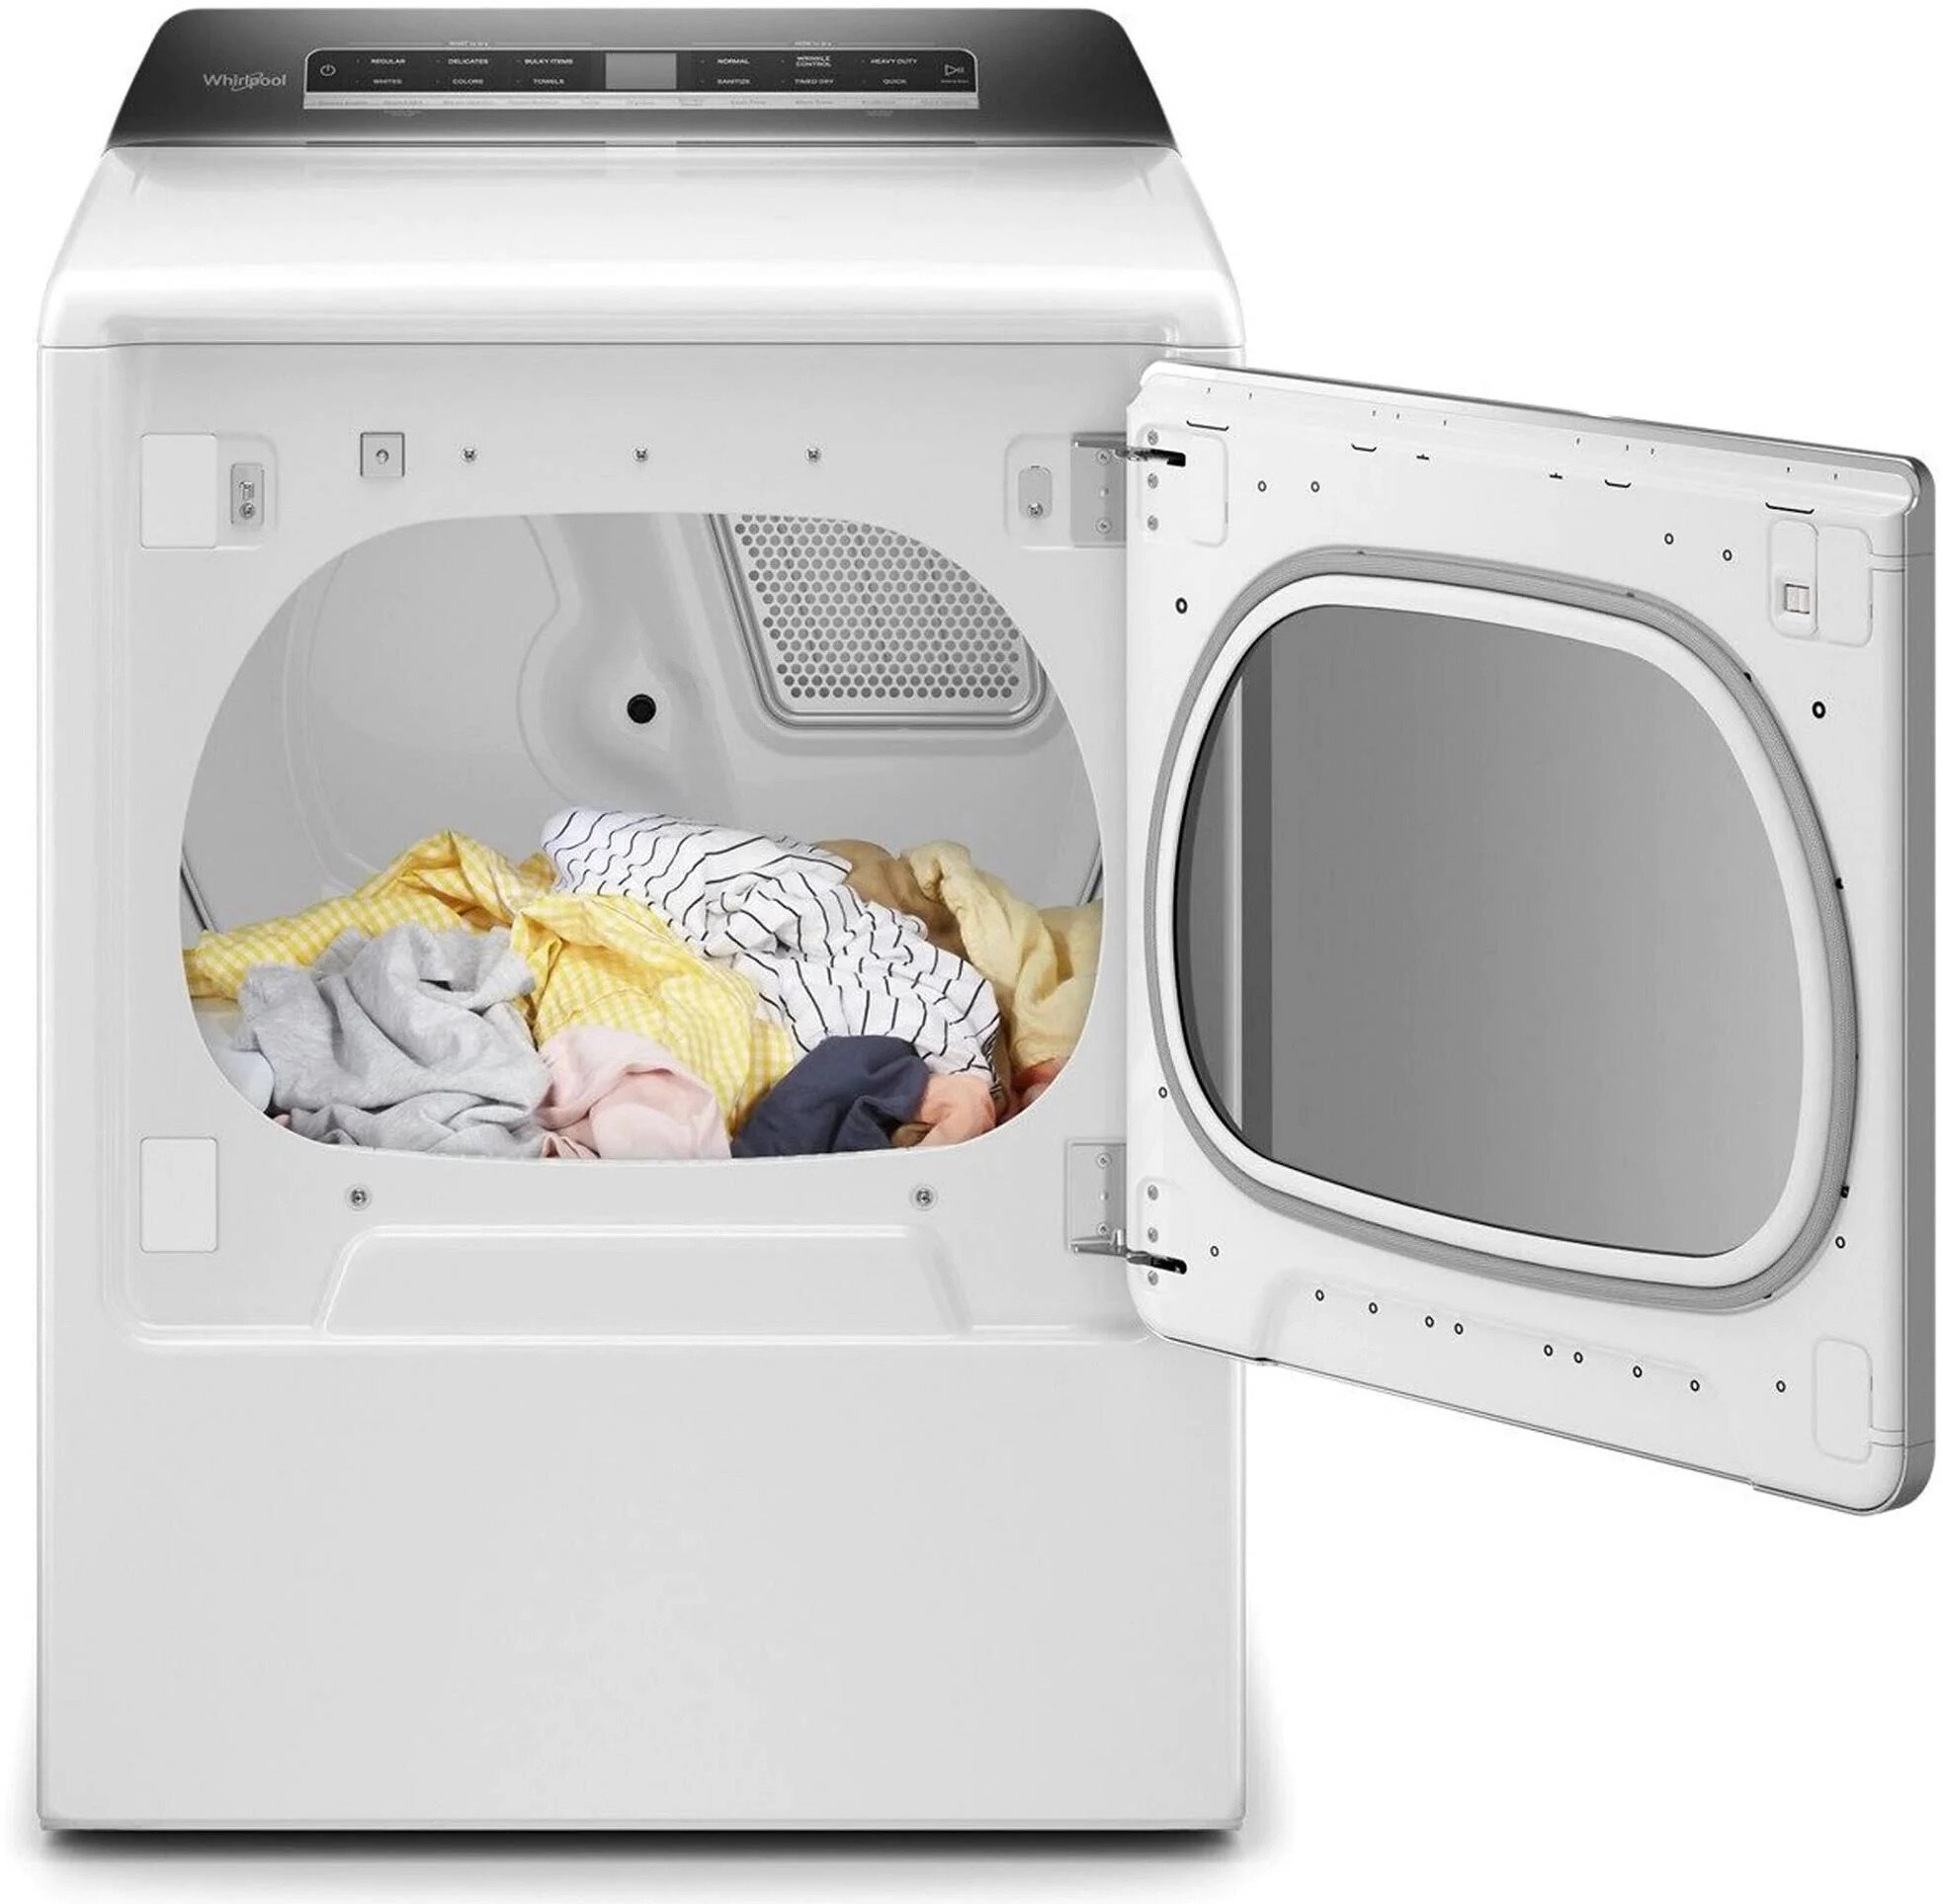 How To Fix The Error Code F30 For Whirlpool Dryer